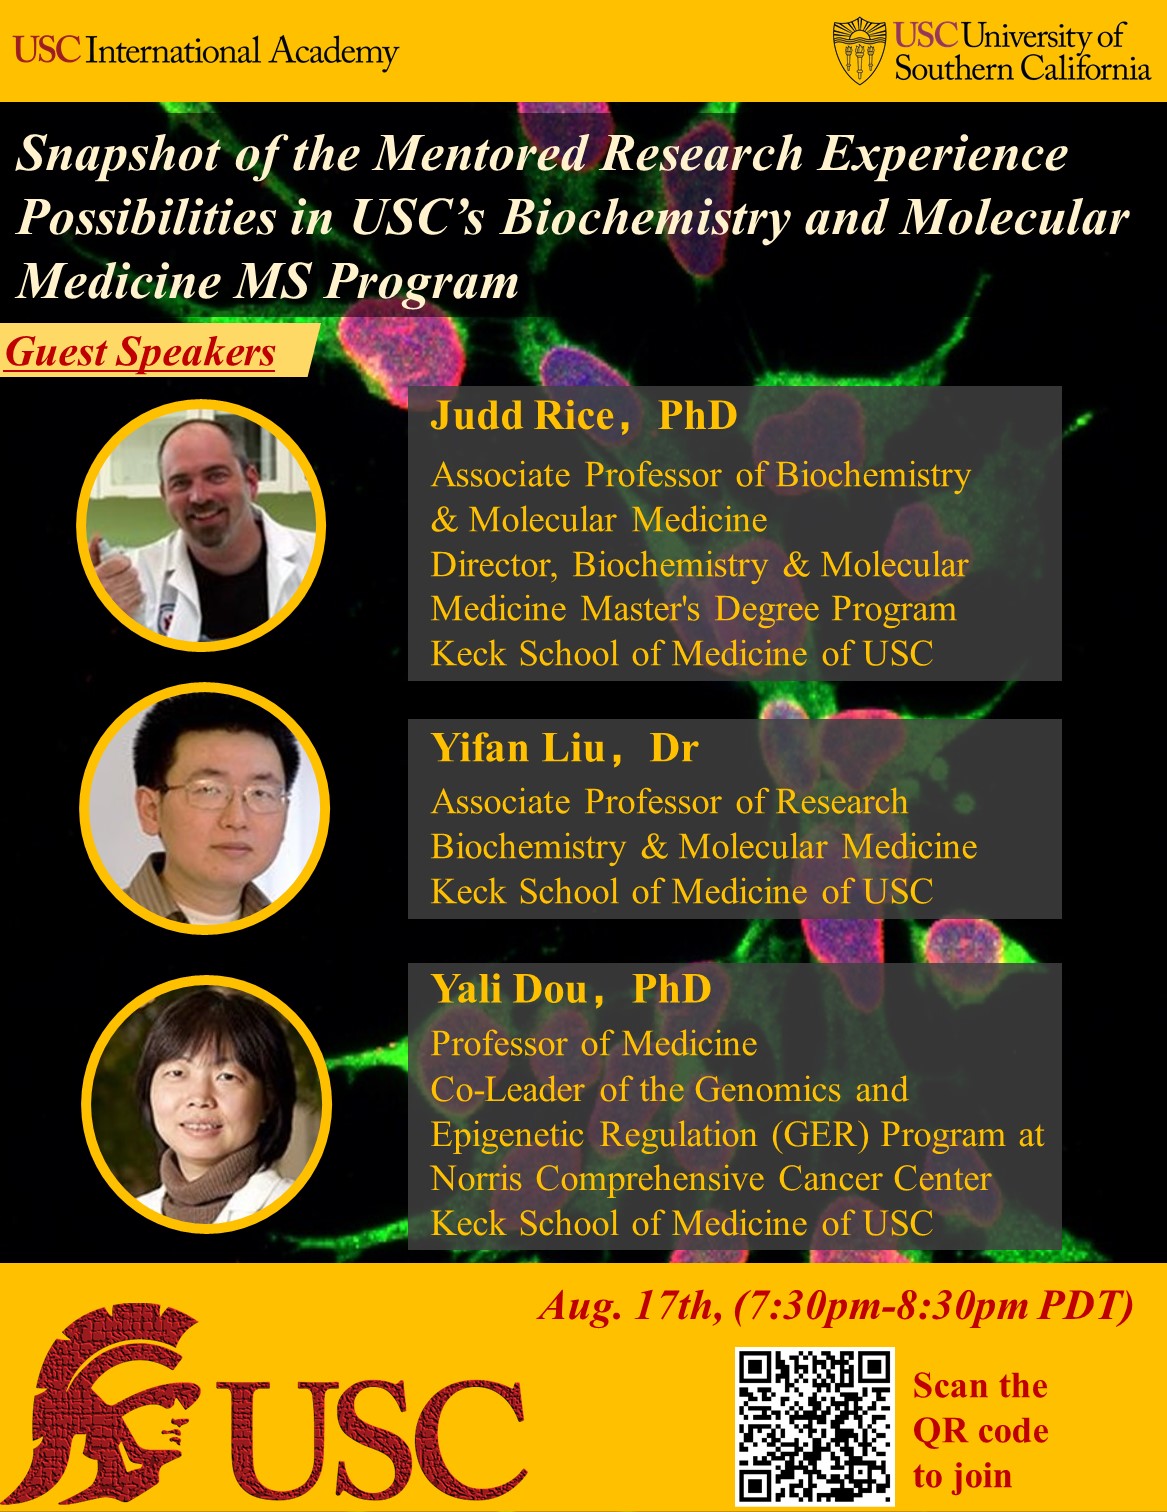 Snapshot of the Mentored Research Experience Possibilities in USC’s Biochemistry and Molecular Medicine MS Program